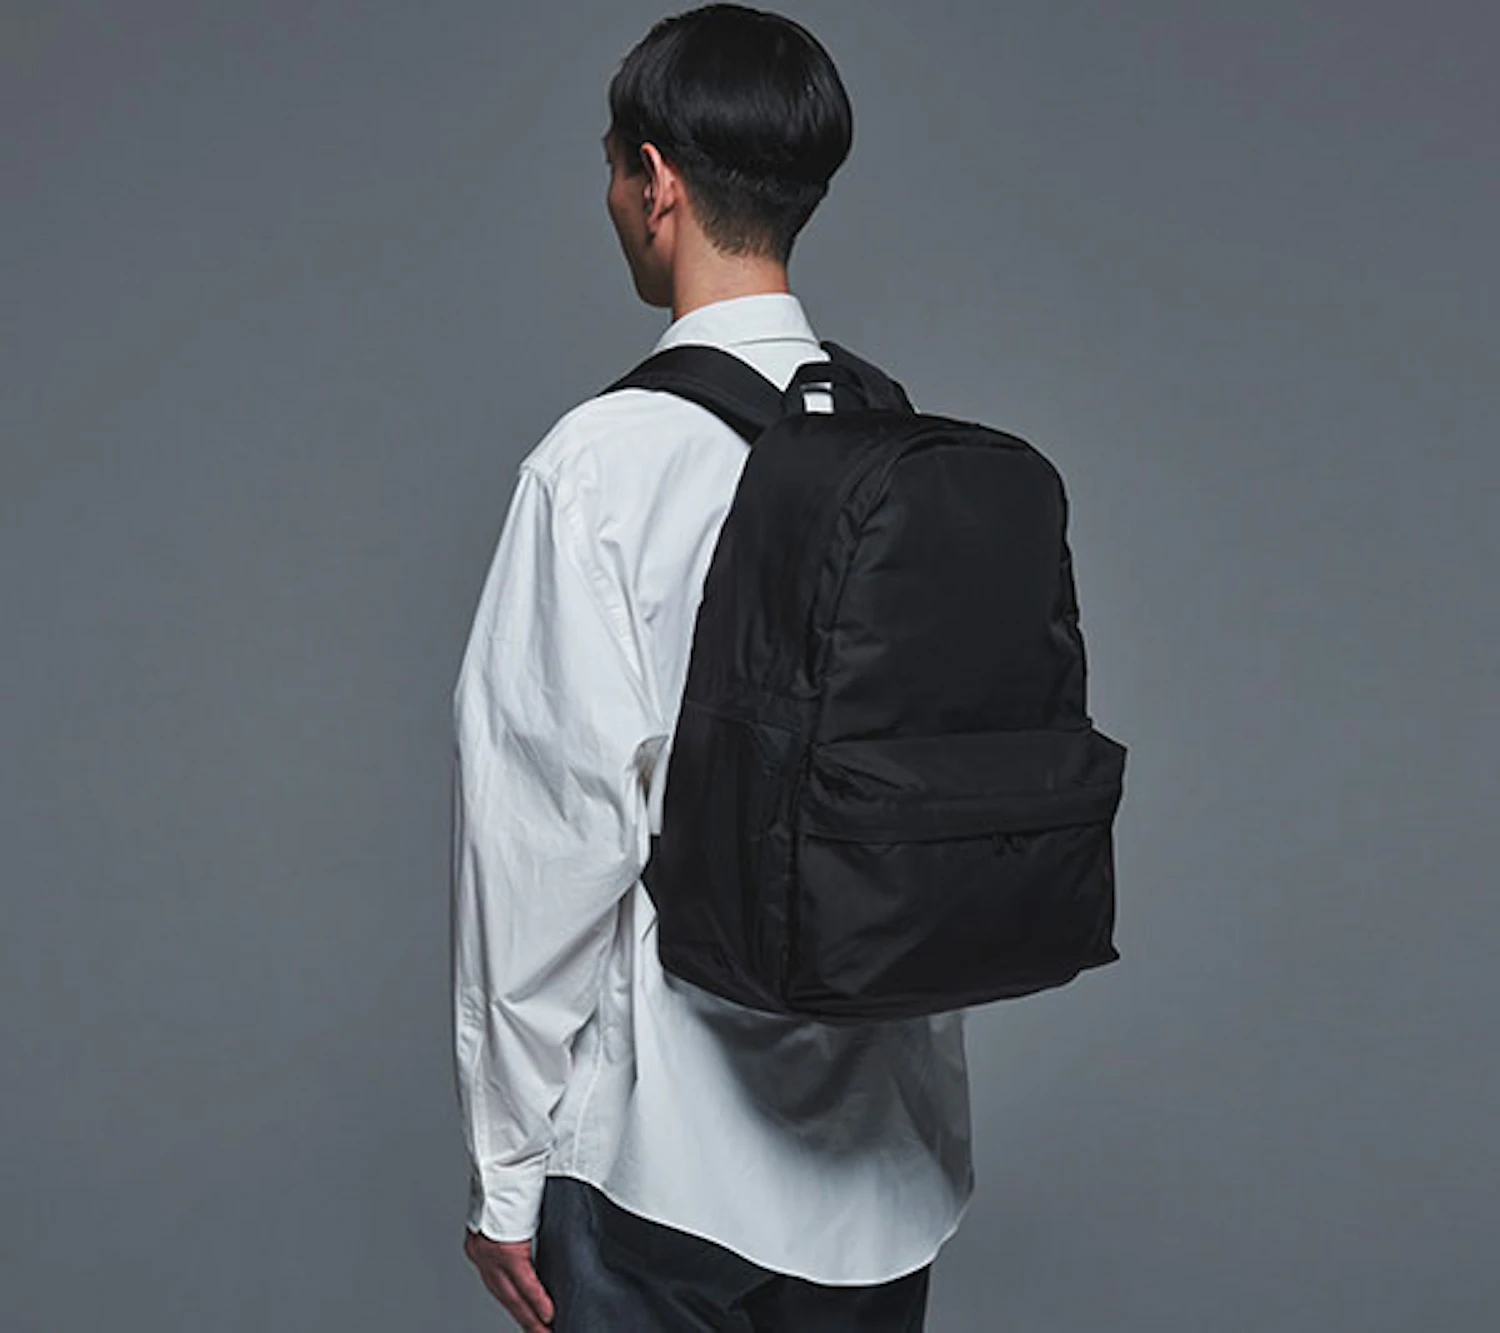 BACKPACK STANDARD M, 33,000 yen (tax included) *Other sizes available: S, L